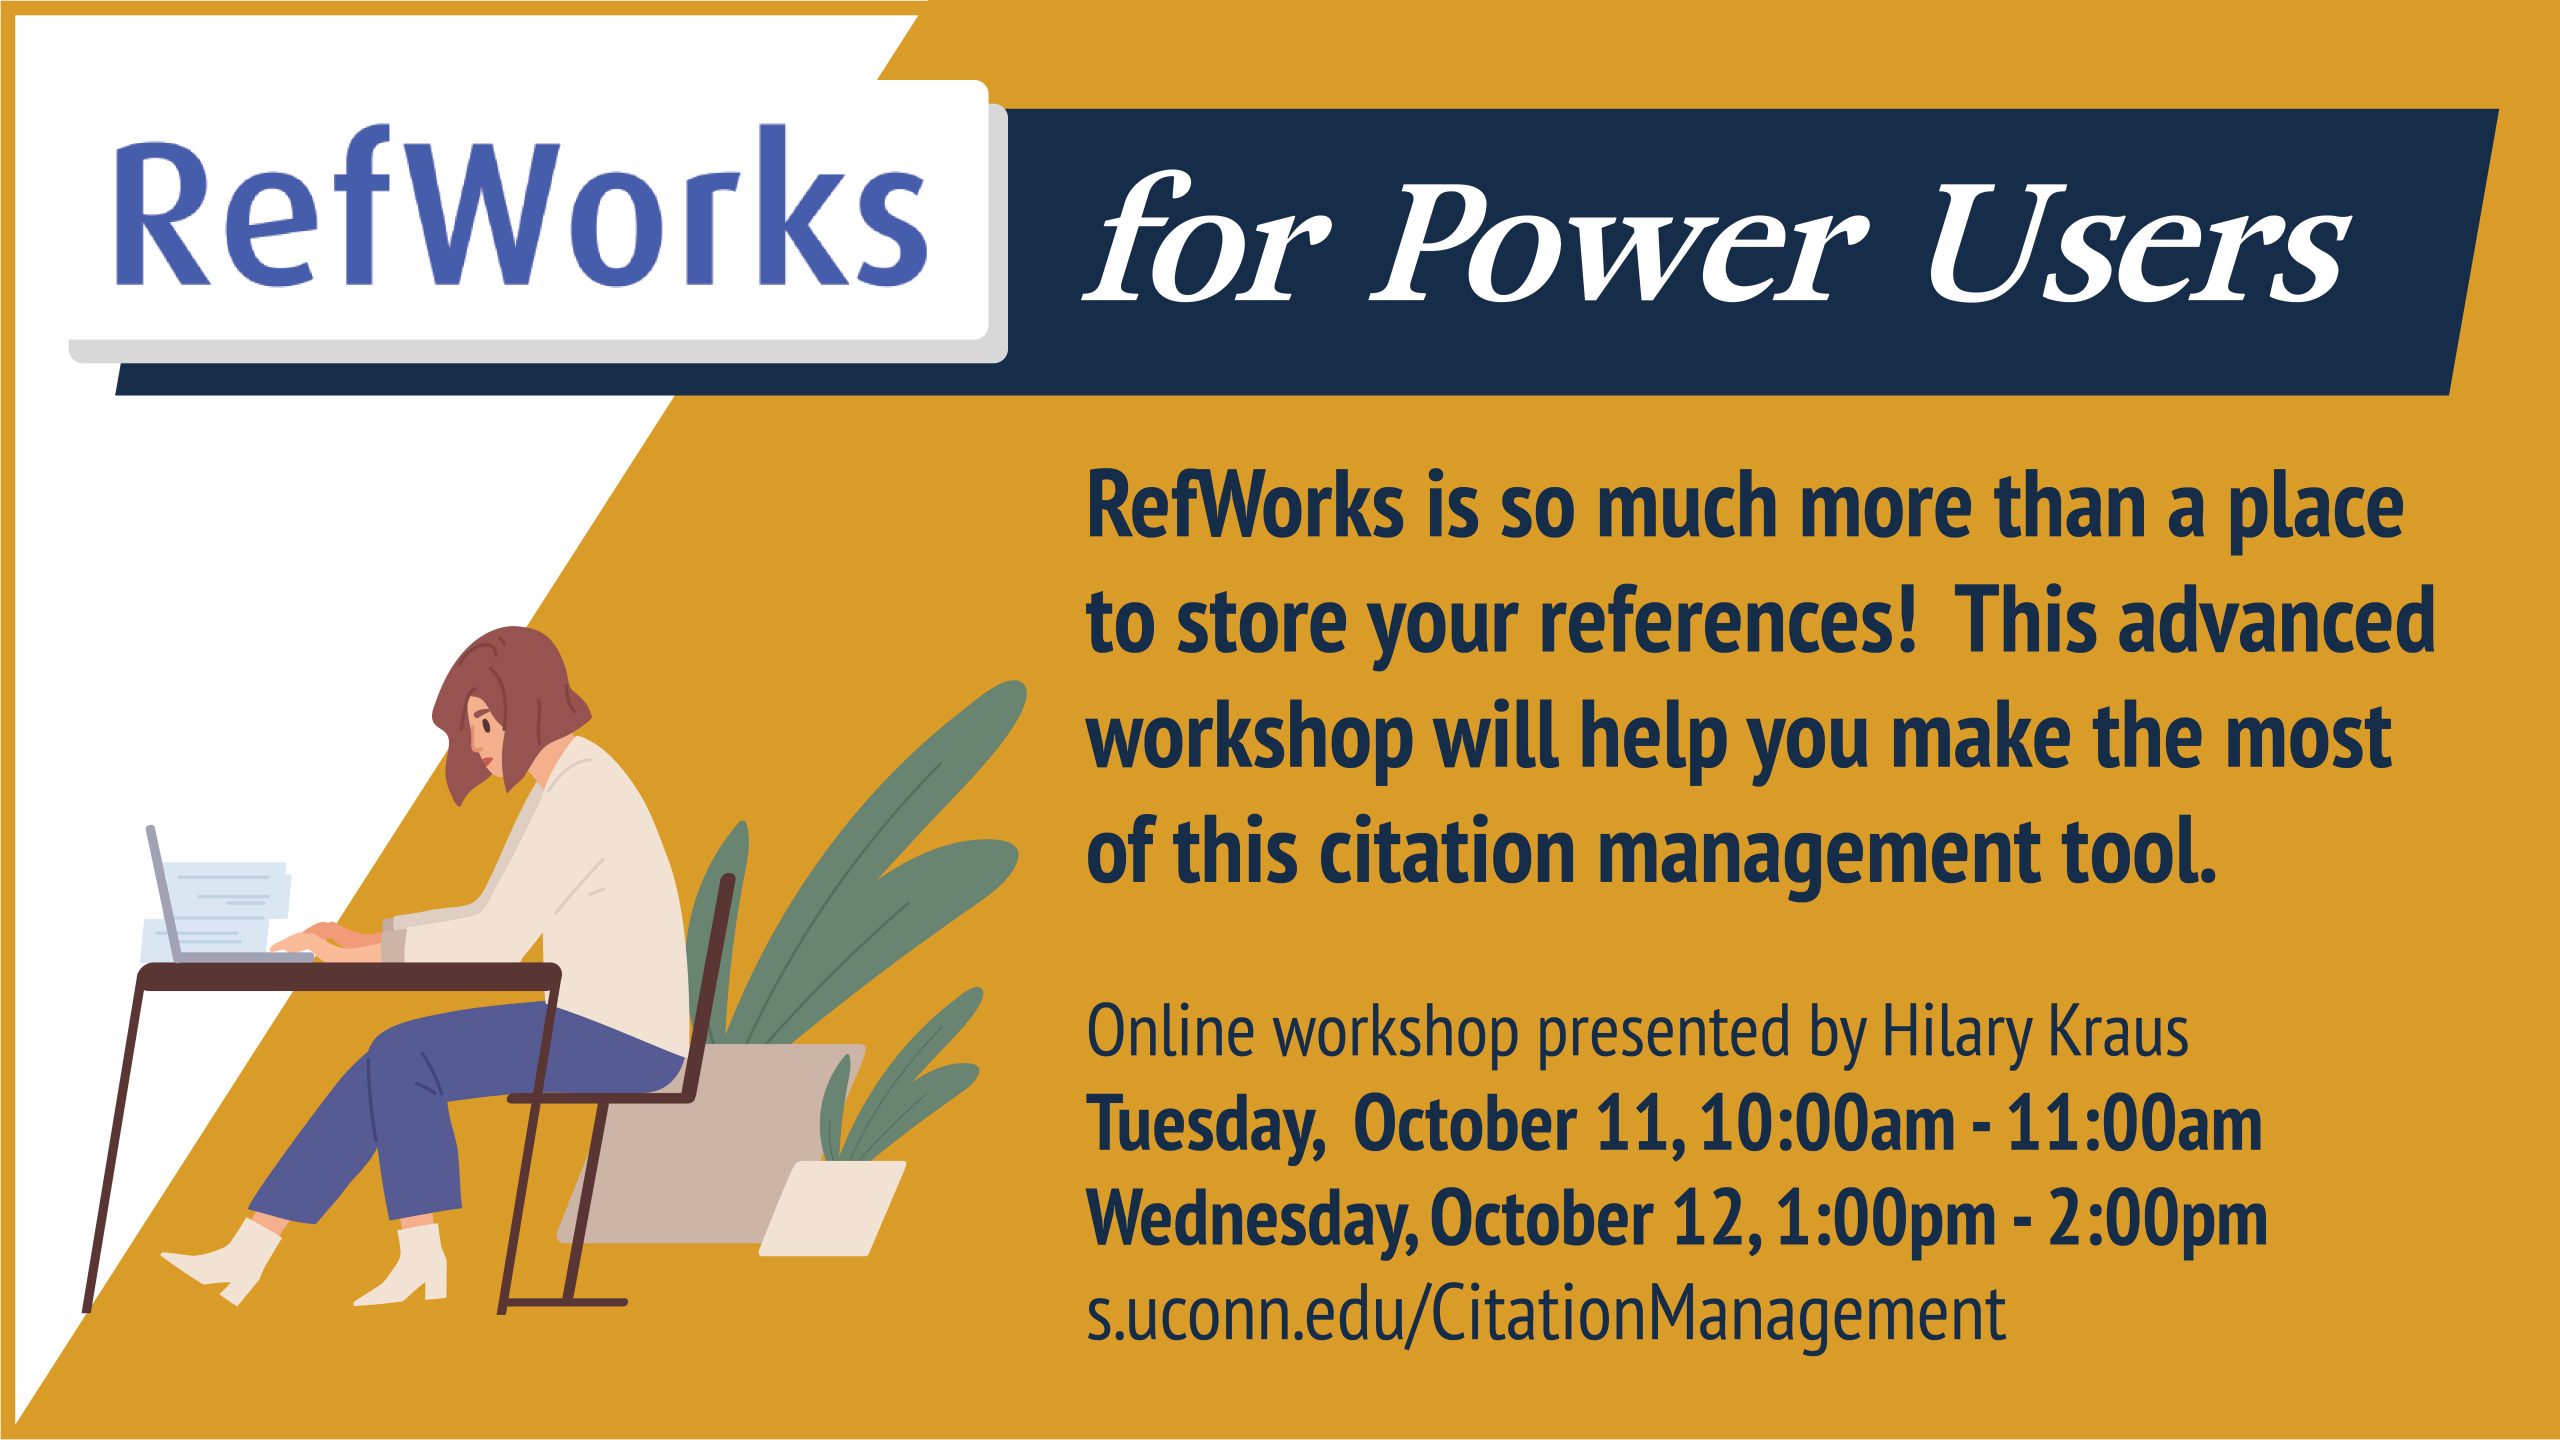 Marketing screen with illustration of a person sitting at a desk and using a computer with the text, “Refworks for Power Users. RefWorks is so much more than a place to store your references! This advanced workshop will help you make the most of this citation management tool. Online workshop presented by Hilary Kraus. Tuesday, October 11, 10:00am - 11:00am. Wednesday, October 12, 1:00pm - 2:00pm. s.uconn.edu/CitationManagement".